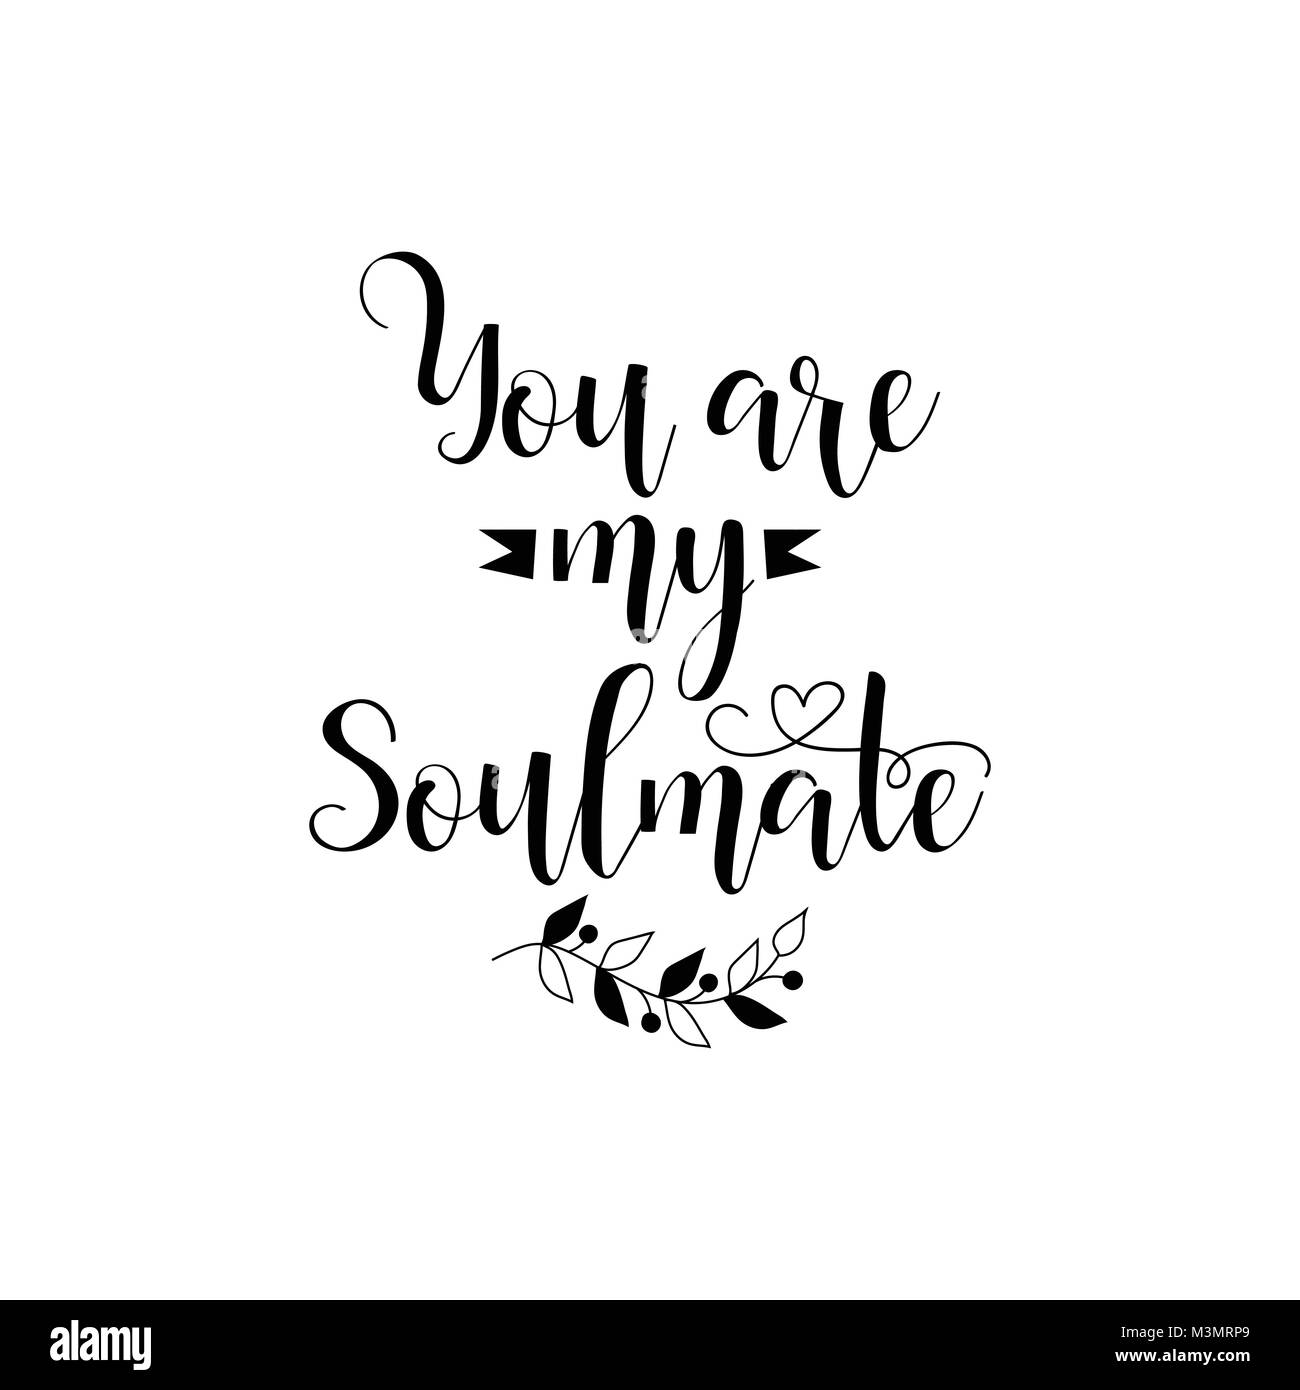 you are my soulmate. Romantic inspirational quote. Typography for valentines day poster, invitation, greeting card or t-shirt. Vector calligraphy desi Stock Vector